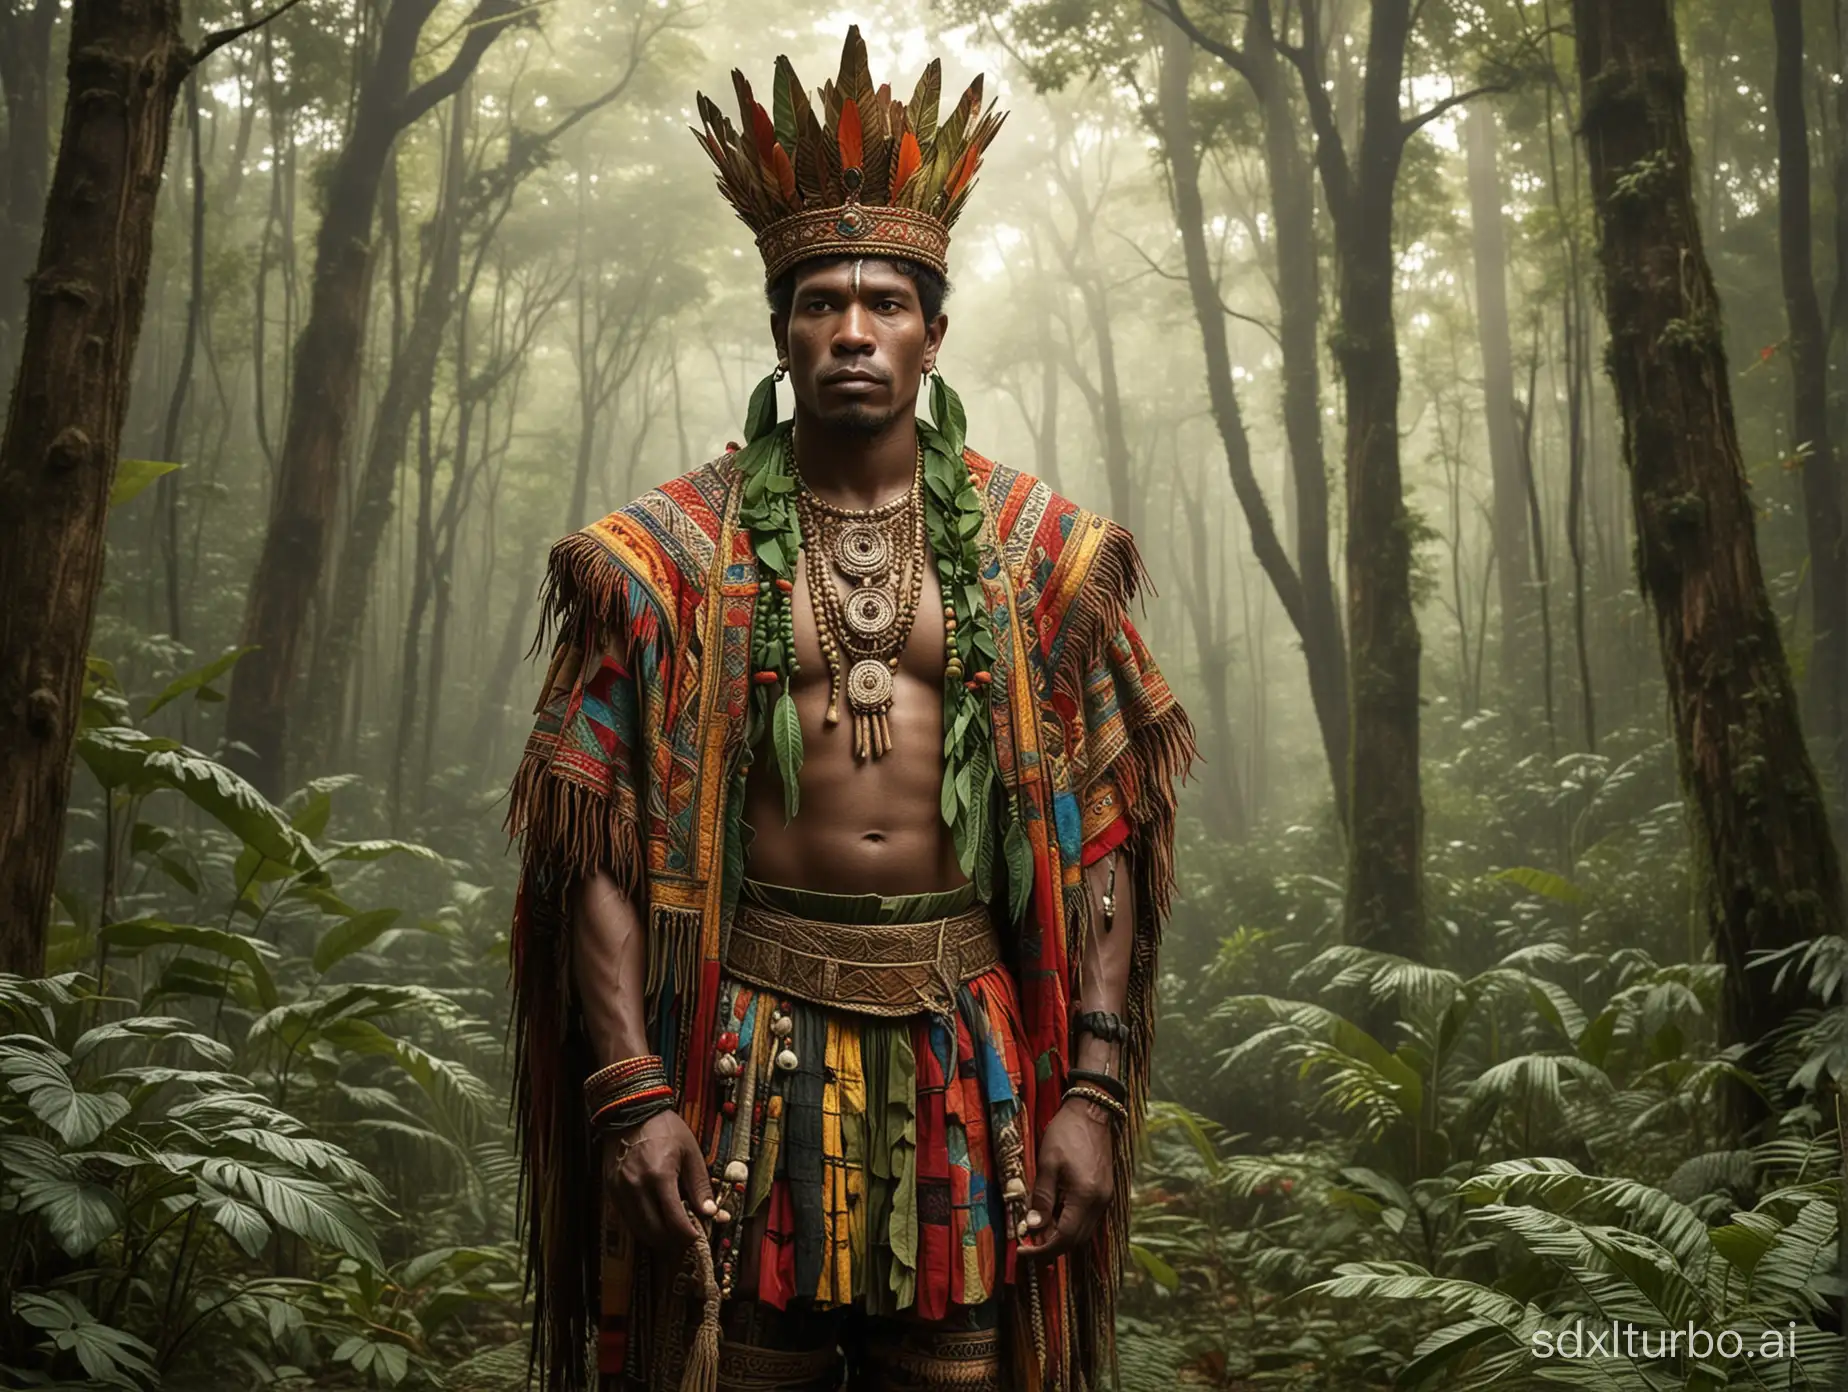 A captivating illustration of a Quilombola king, Malunguinho, standing tall as the guardian of the forests and the catimbó of jurema. He is adorned in traditional Quilombola attire, with a crown of leaves and a necklace made of natural elements. The background reveals lush, enchanted forests with animals and spirits blending harmoniously. The overall atmosphere of the image is mystical and respectful of the Quilombola culture and traditions XAMANICS